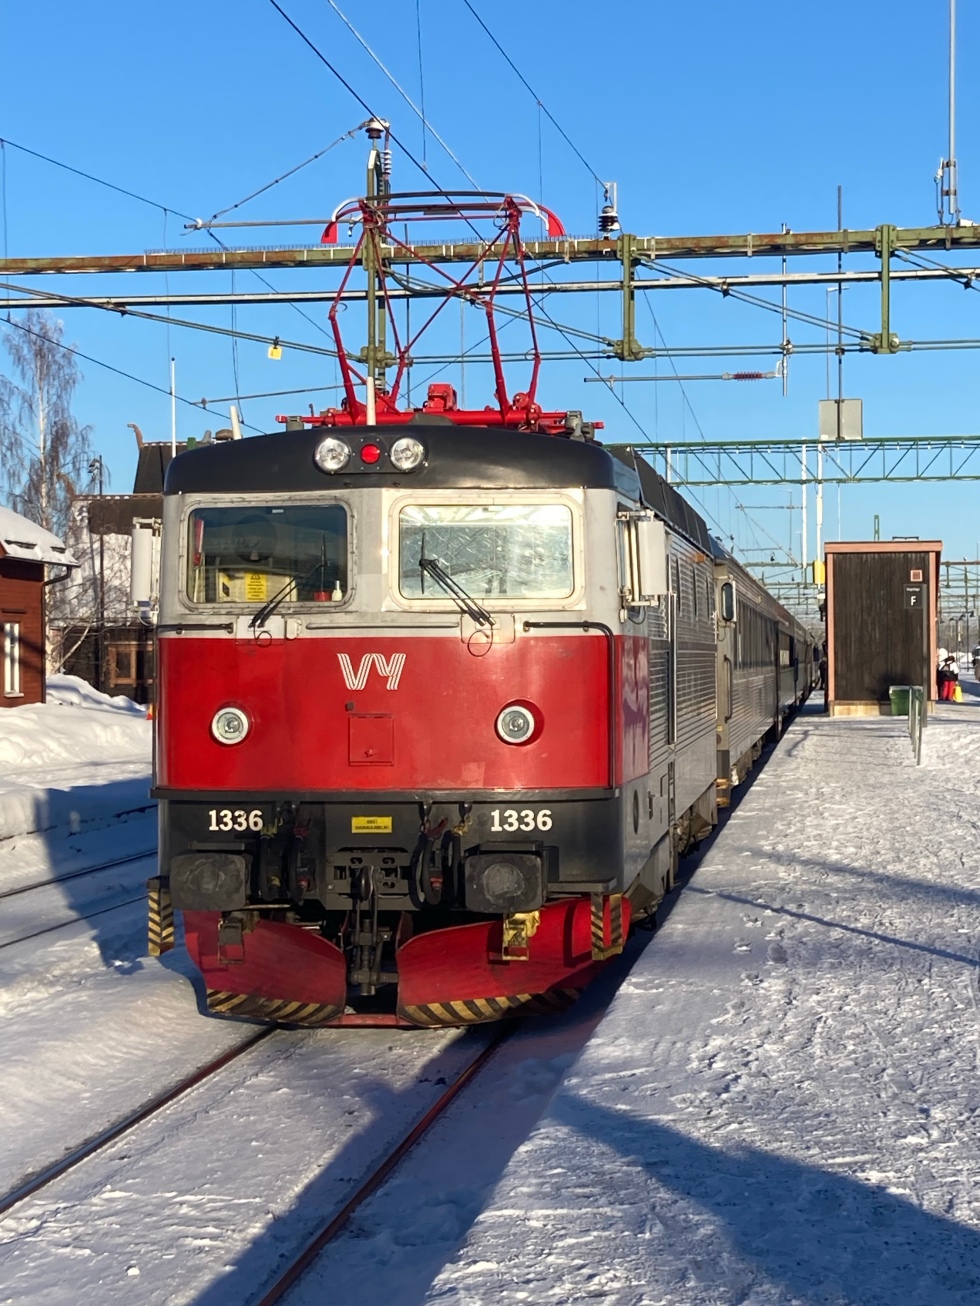 Vy night train 'Arctic Circle Train' Rc6 type engine in Boden C